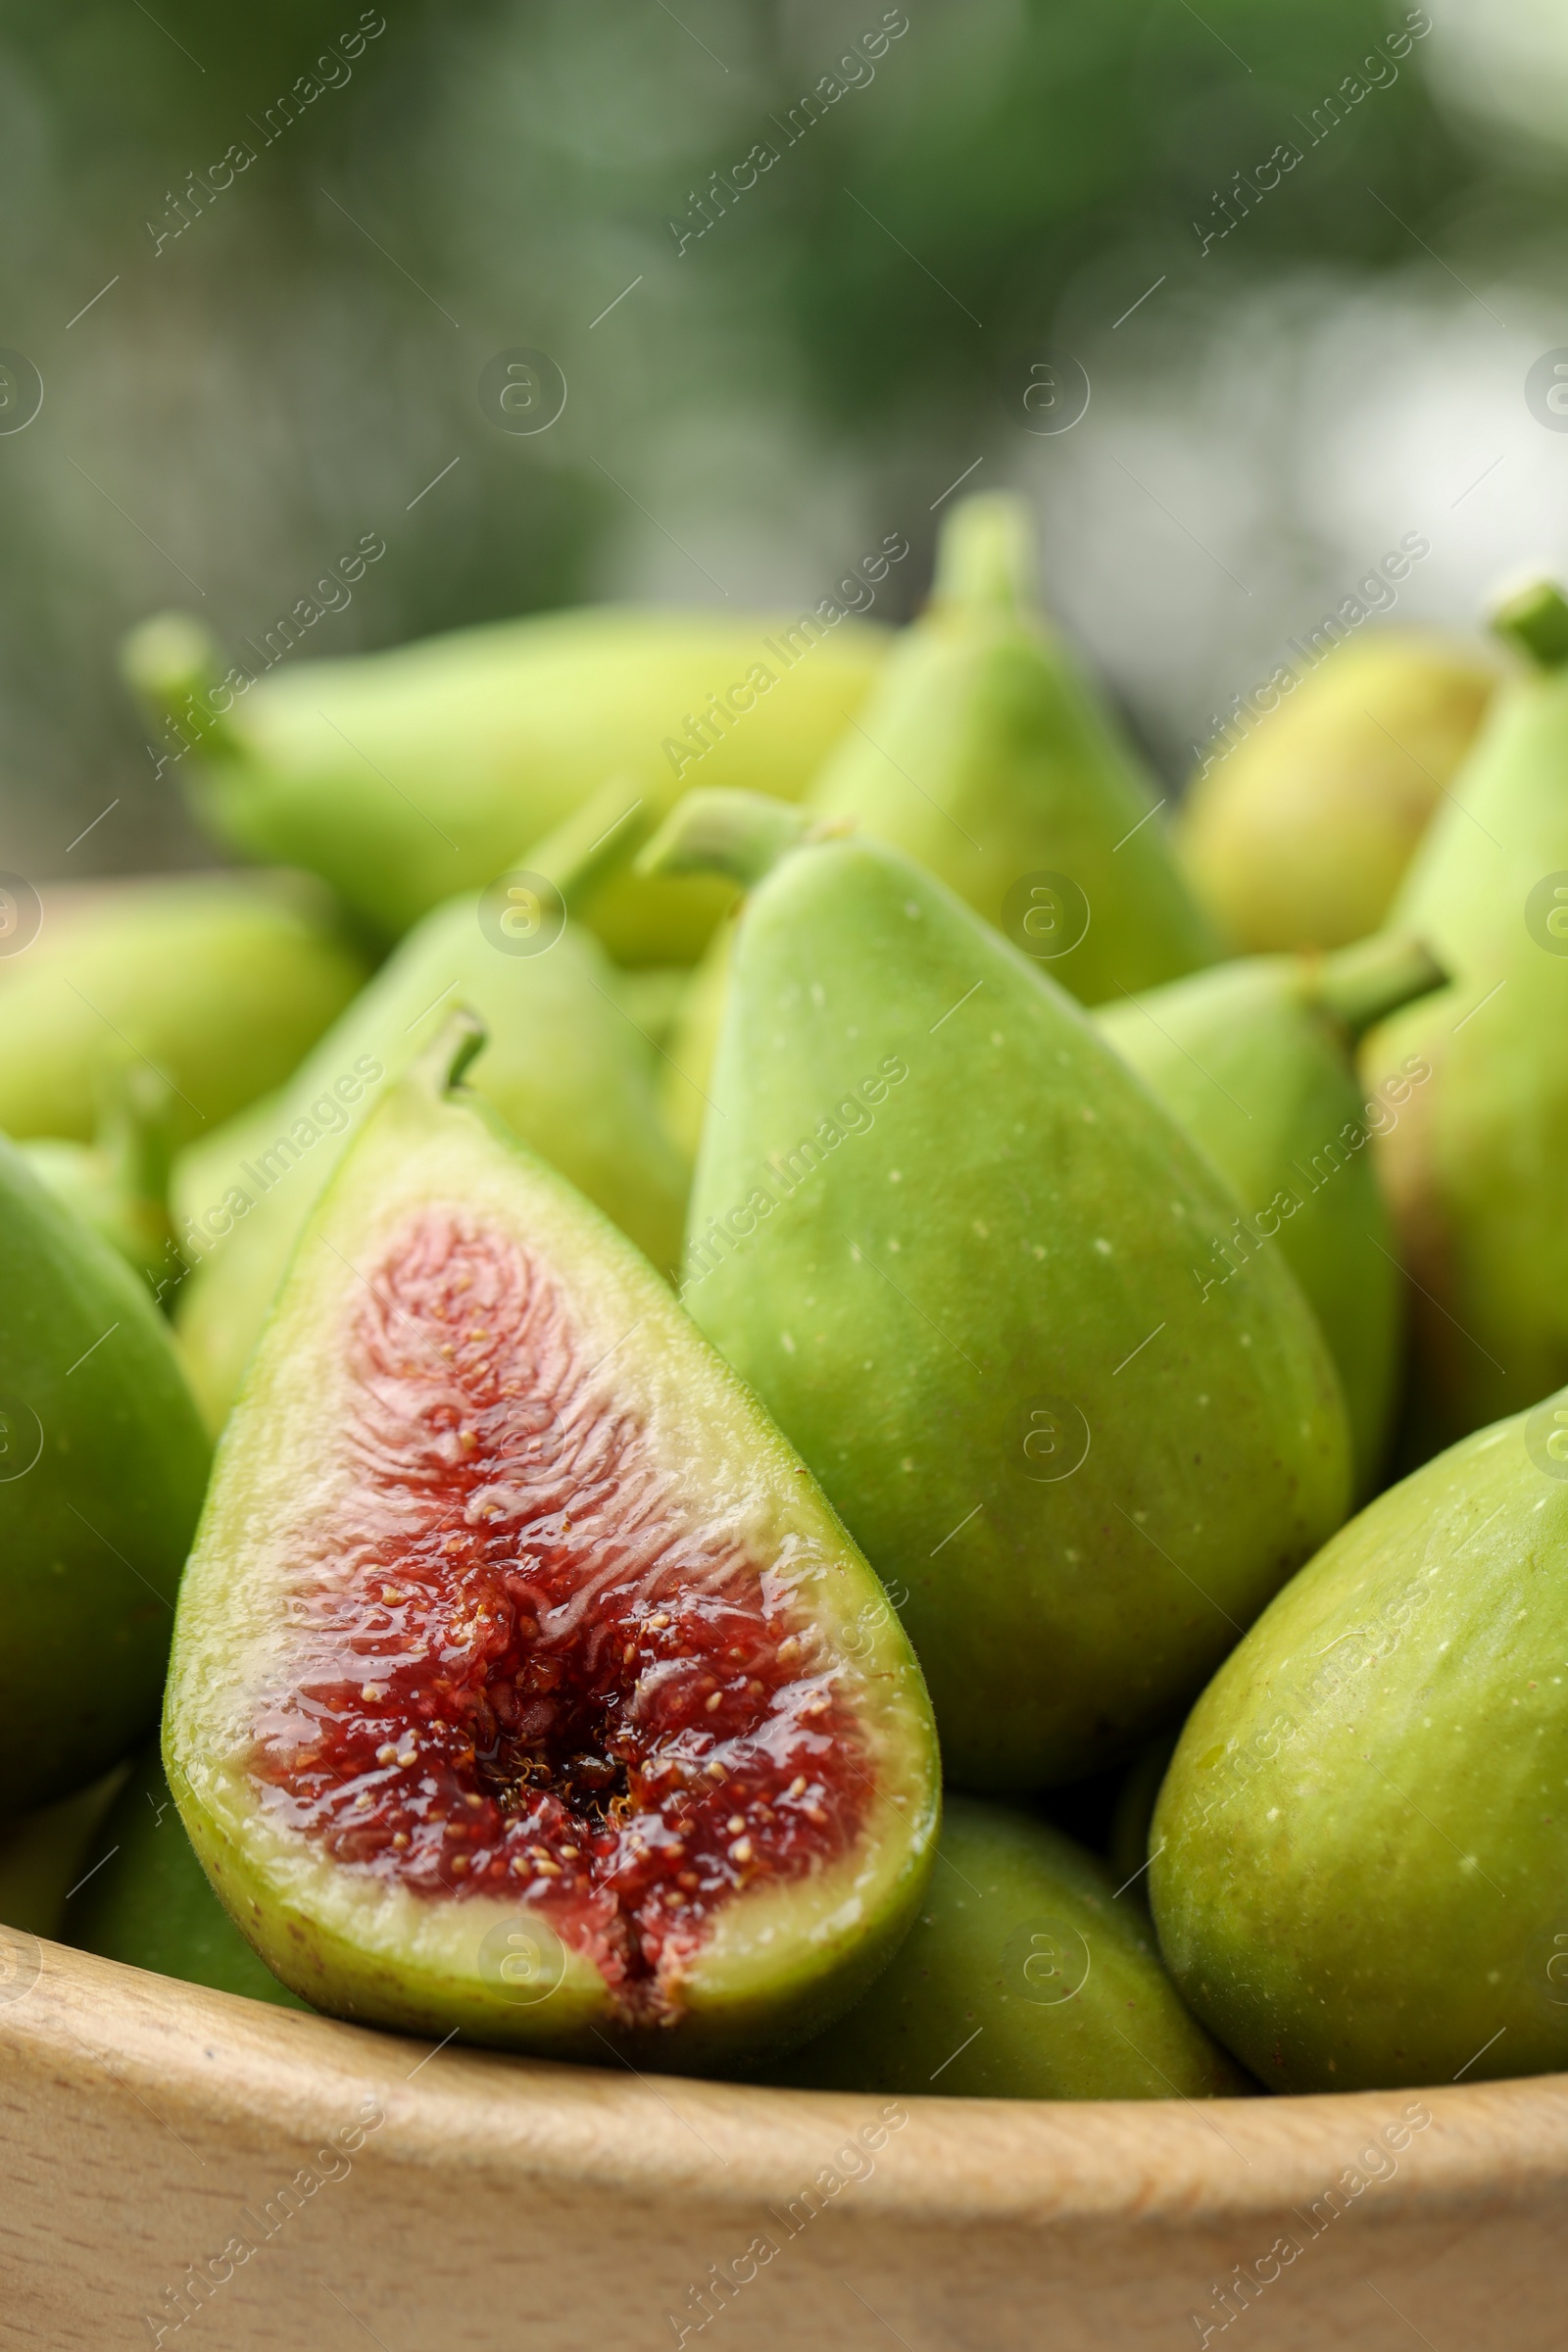 Photo of Cut and whole fresh green figs in wooden bowl against blurred background, closeup